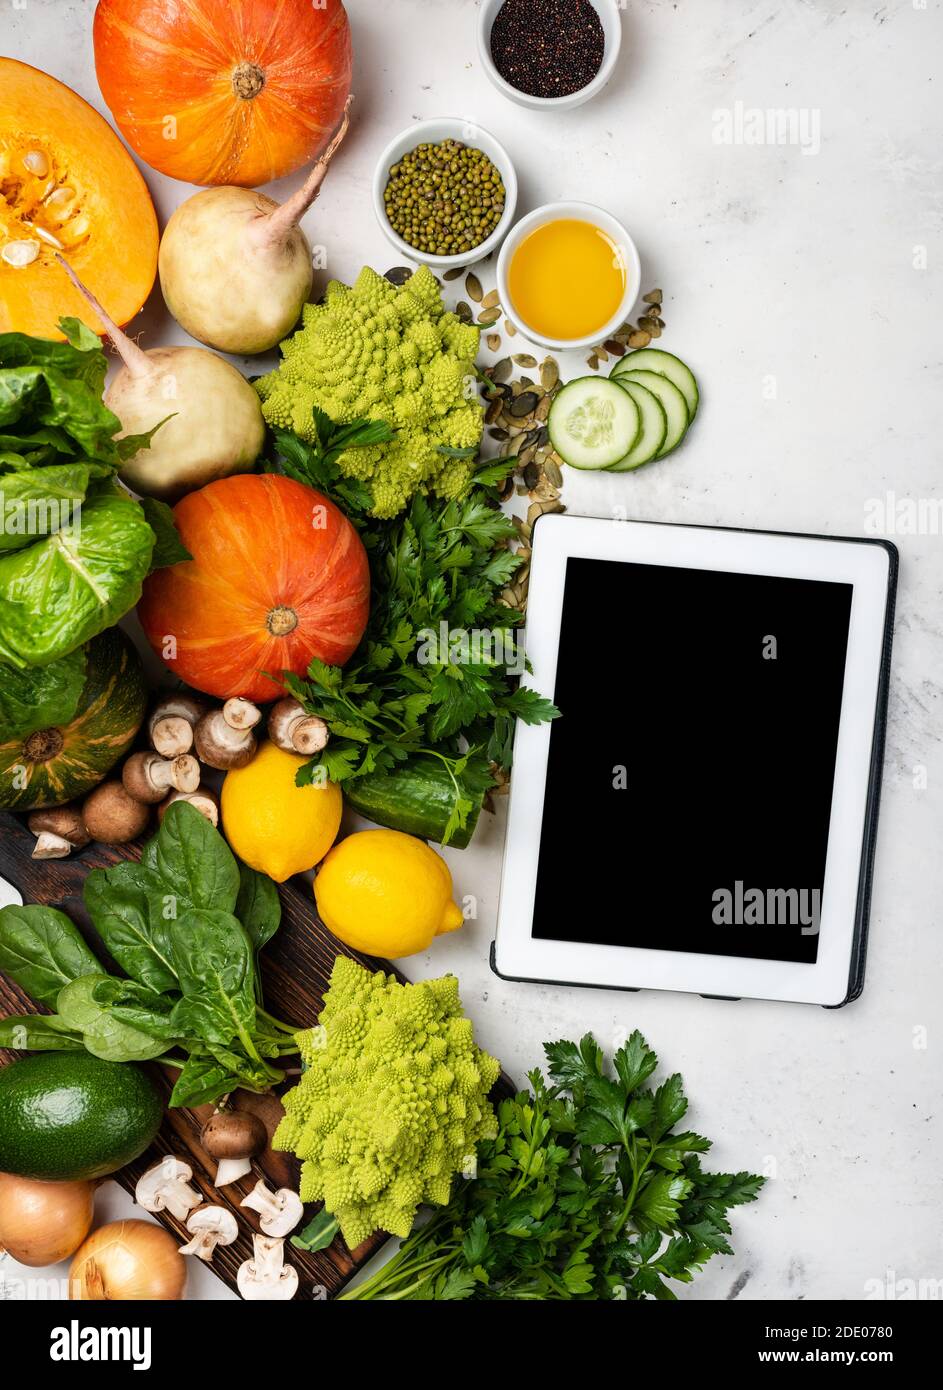 Tablet computer with ingredients for cooking healthy food Stock Photo